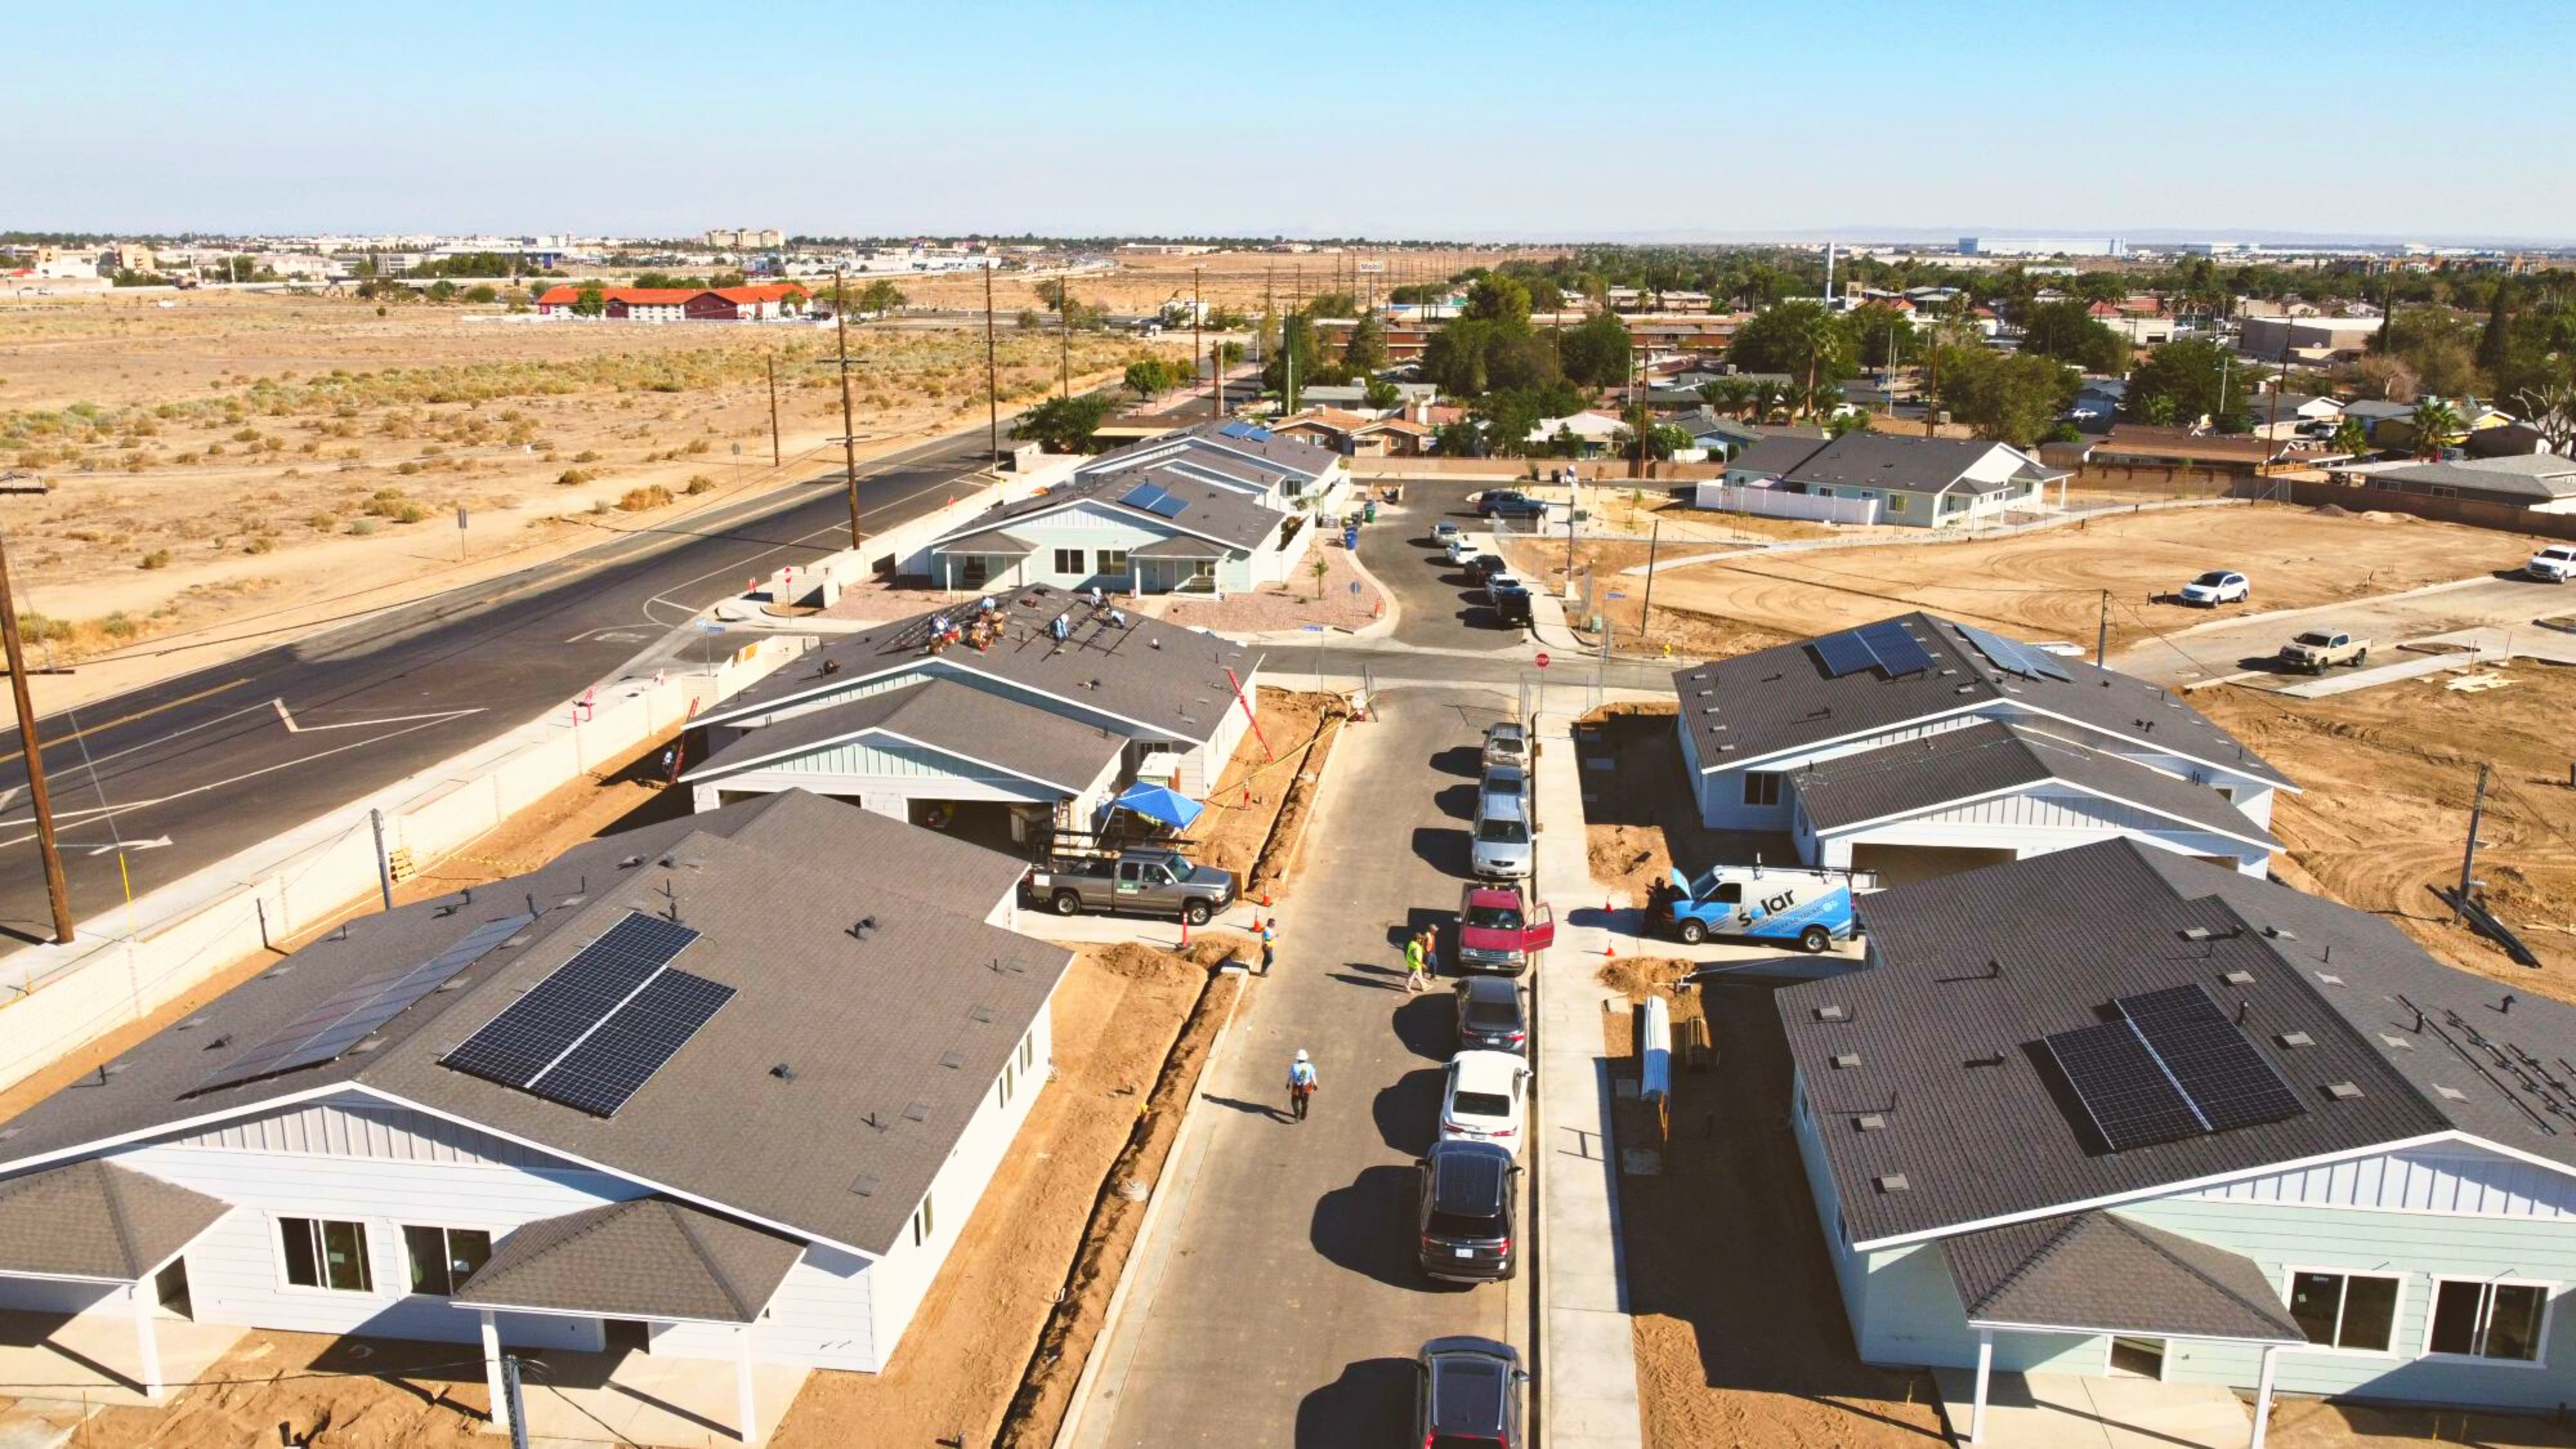 solar powered affordable housing for veterans in Palmdale 